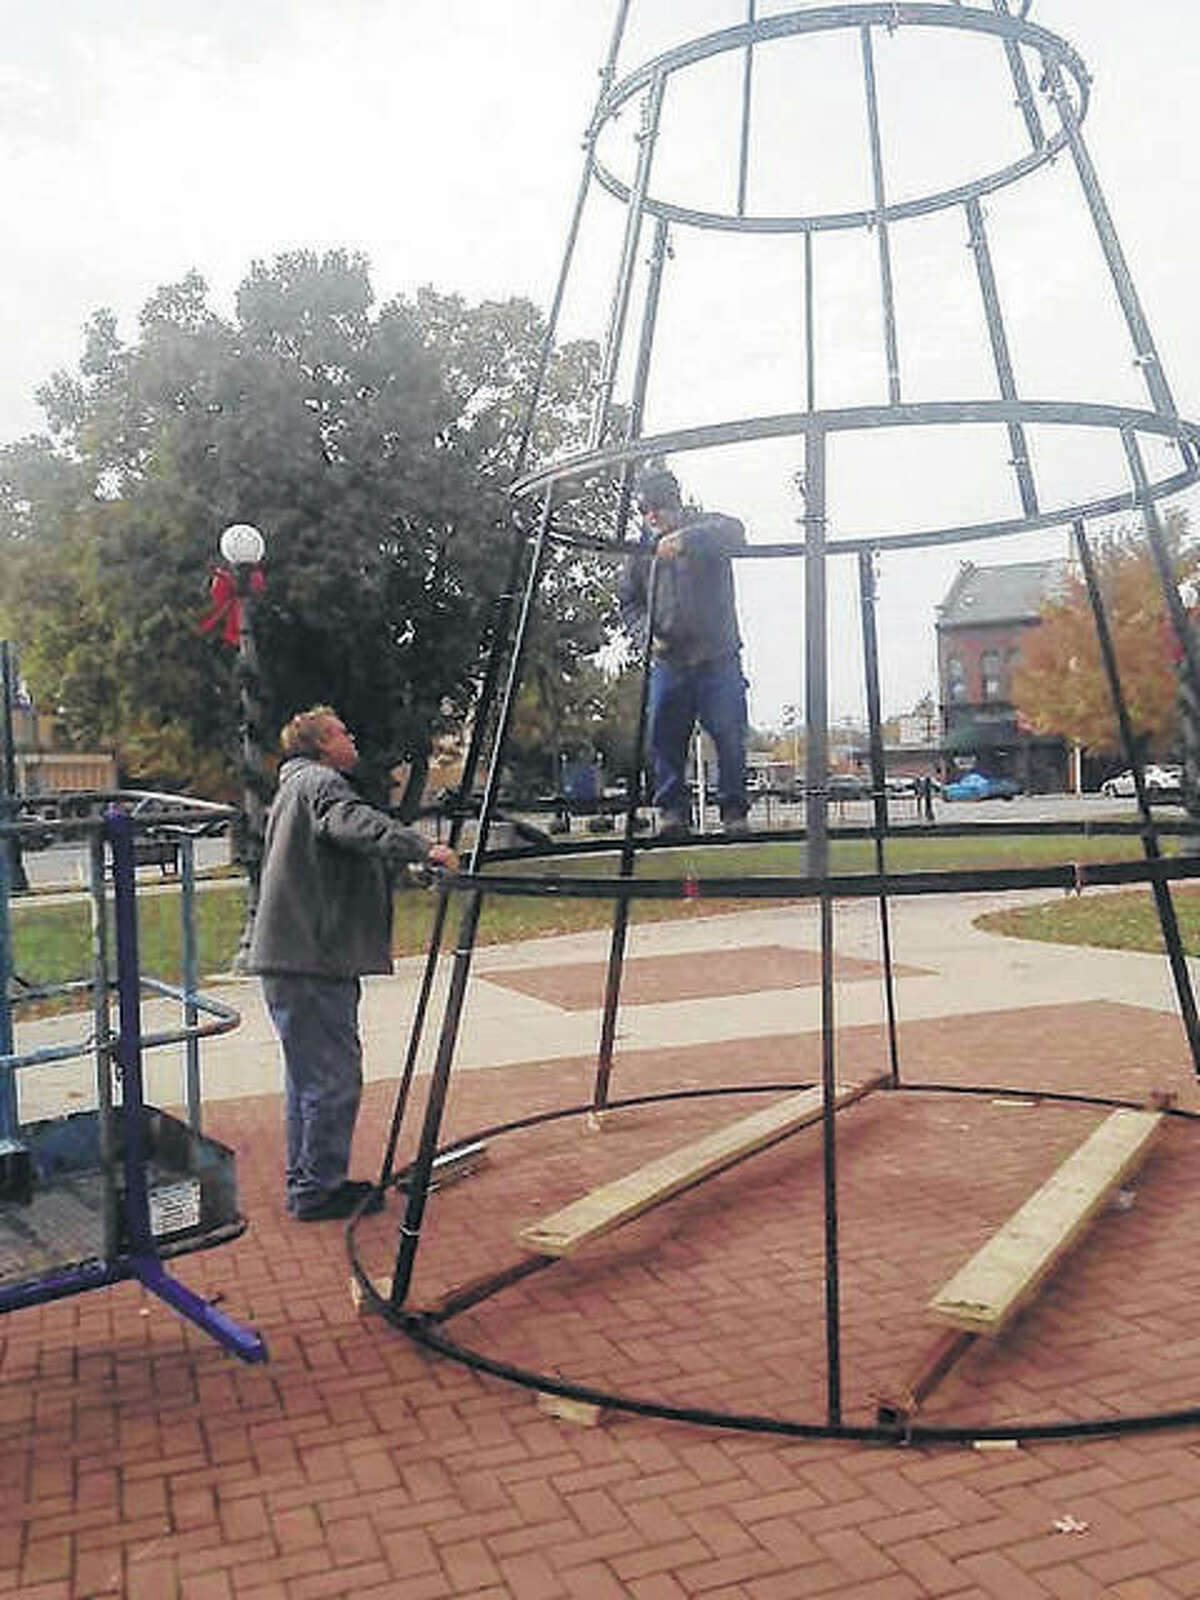 City employees Terry Chumley (left) and Terry Surratt work Tuesday on setting up the base for what will become the city’s Christmas tree in downtown’s Central Park. Crews will be working again today on getting the tree put together for the holiday season.